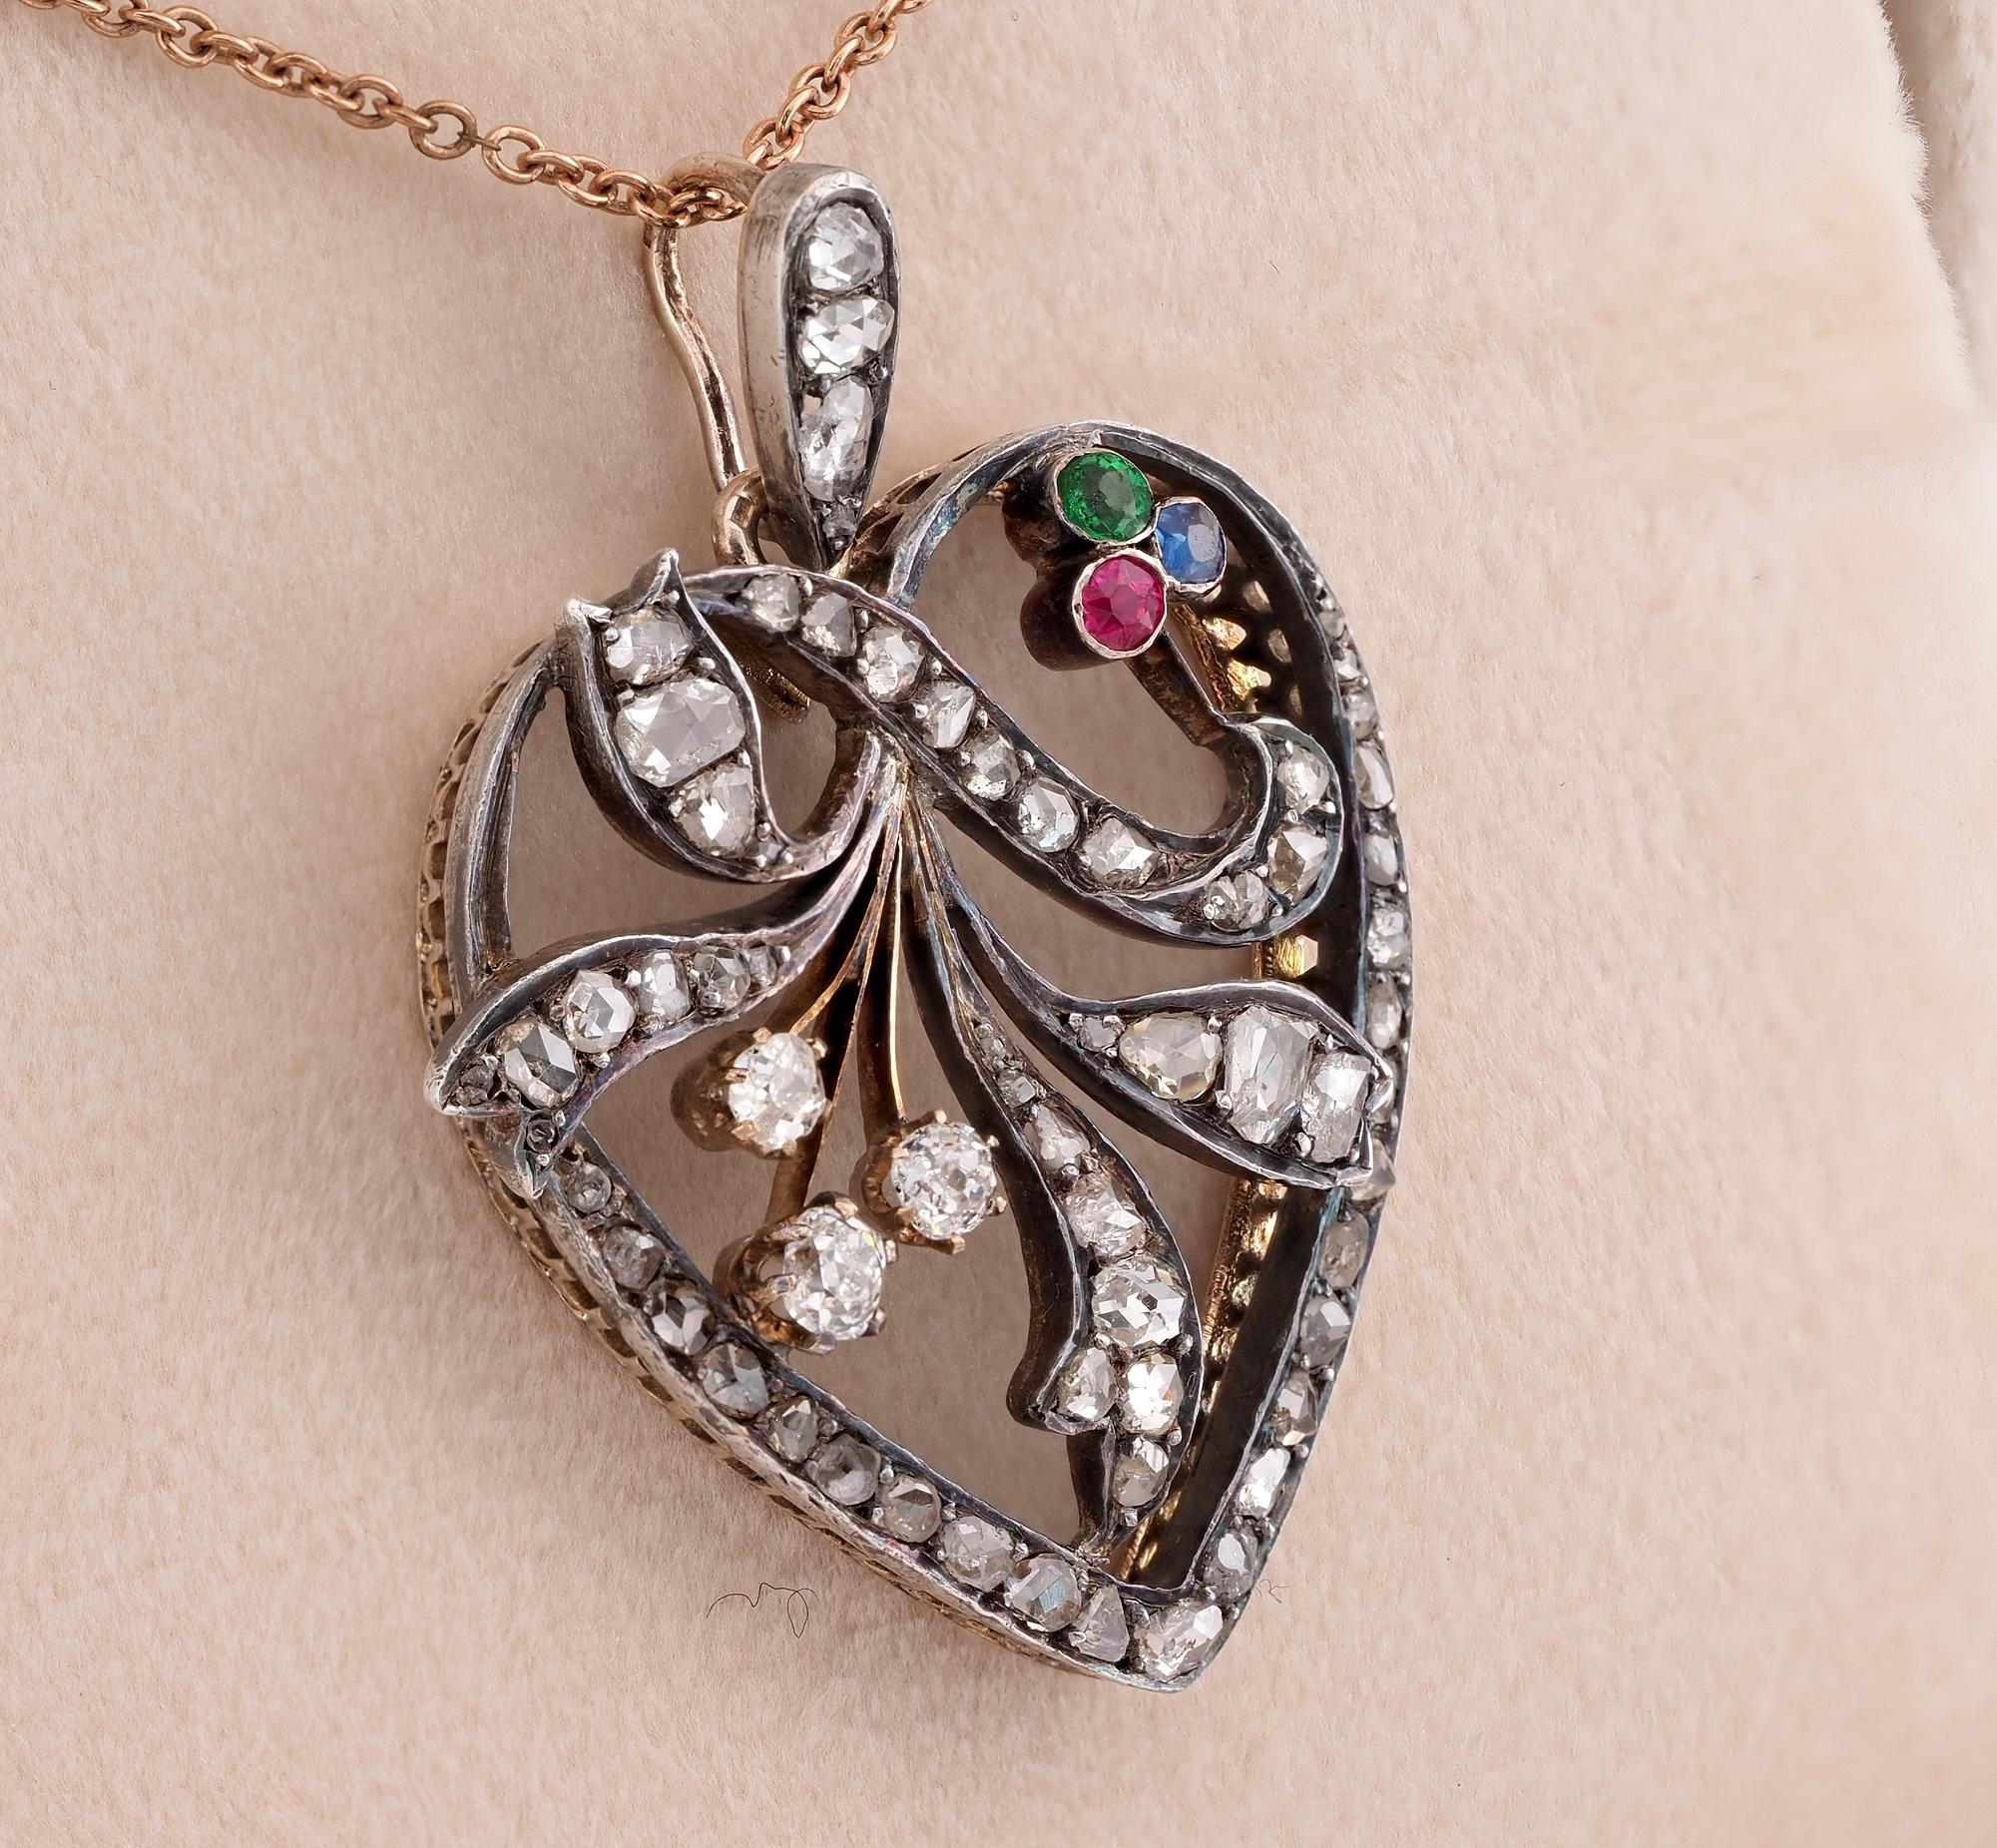 Love Token
This beautiful large sized Victorian Diamond heart pendant is 1870 ca
Hand crafted of solid 18 KT in an amazing openwork expression, fully highlighted by 58 in number Diamonds with a group of coloured paste stones set in a shamrock